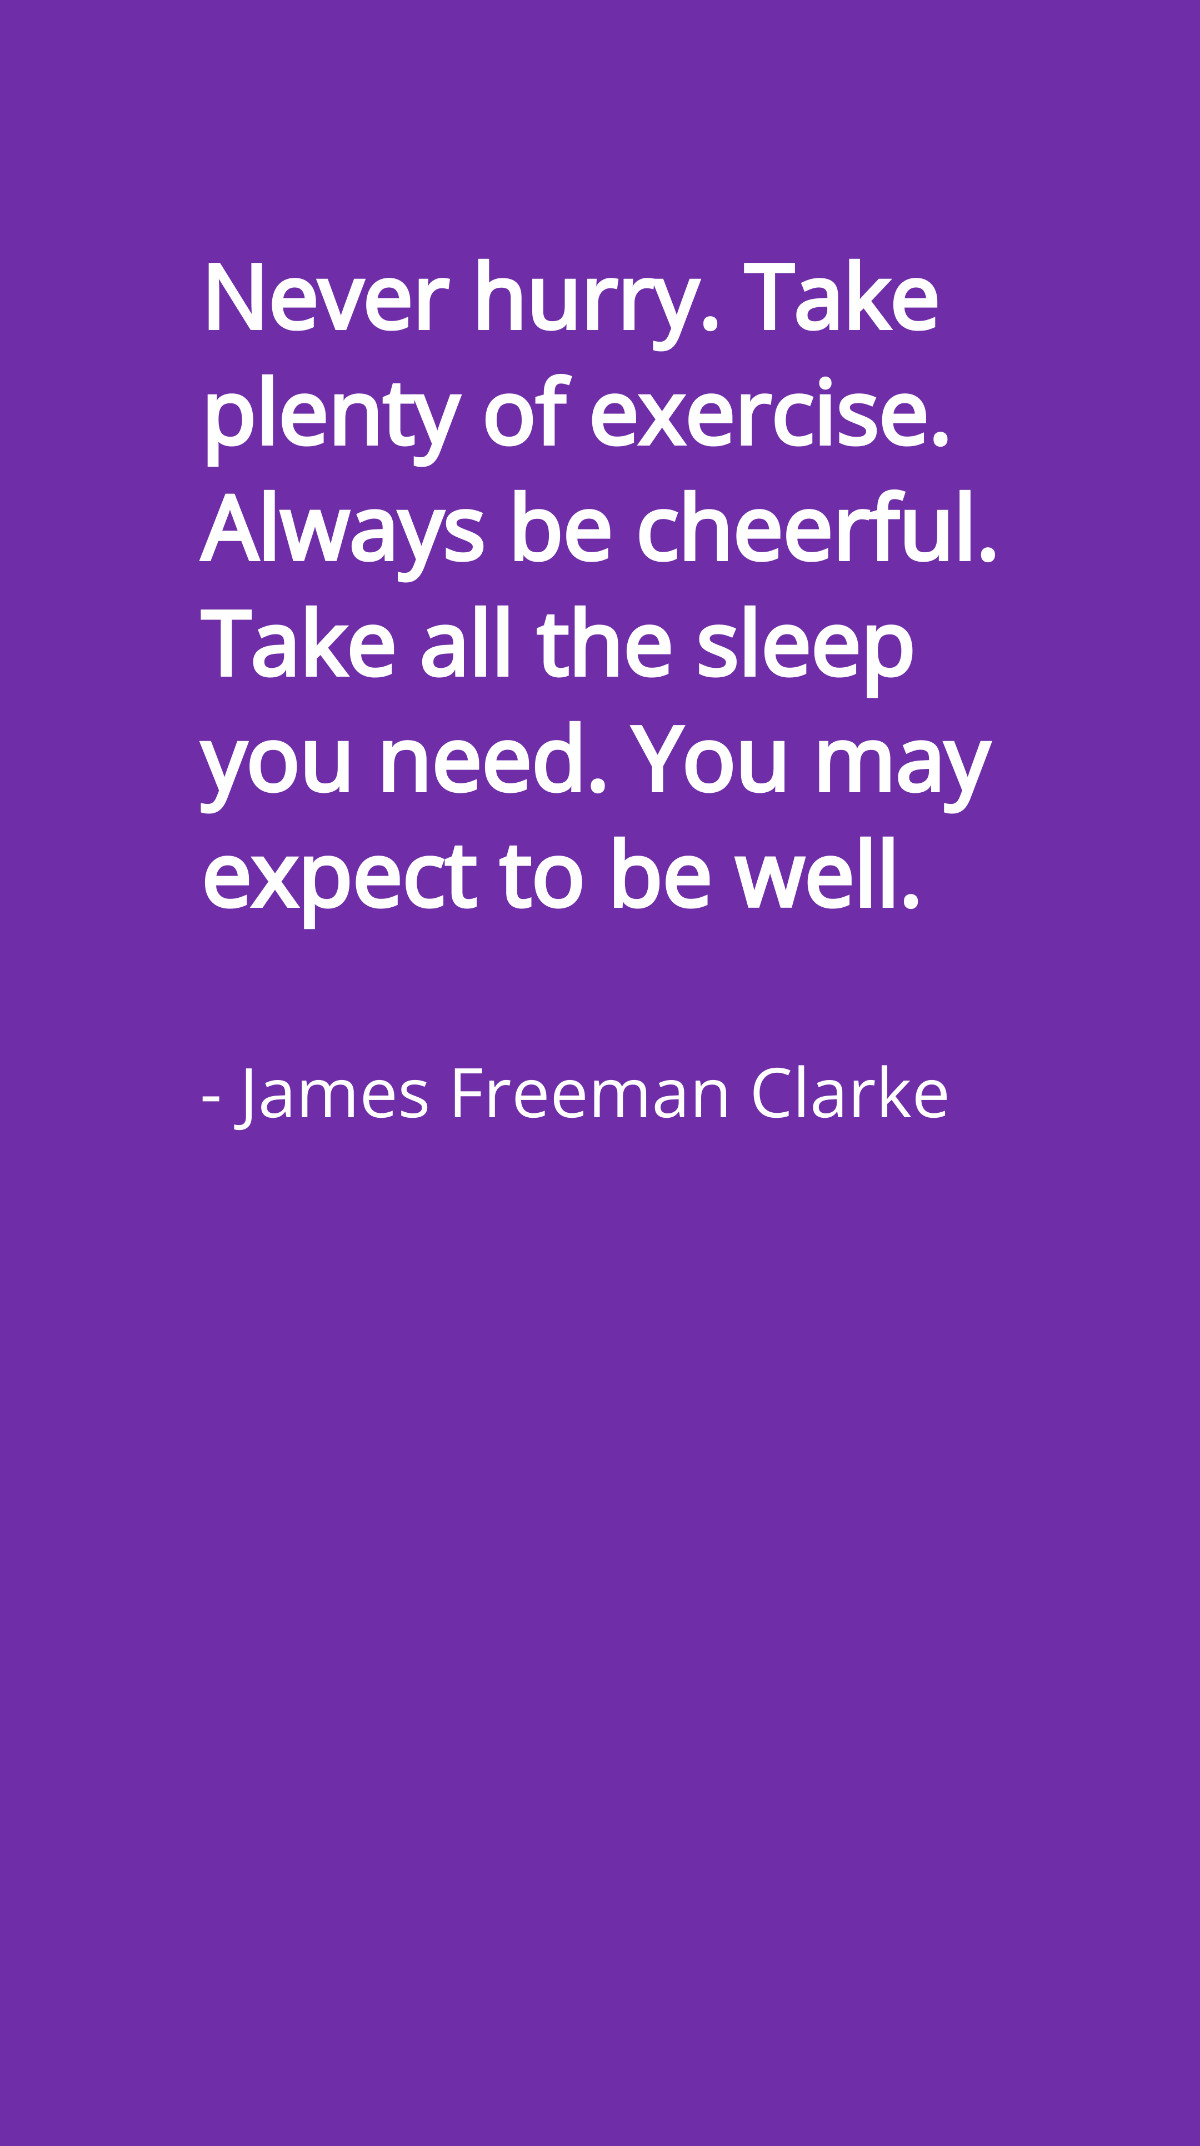 James Freeman Clarke - Never hurry. Take plenty of exercise. Always be cheerful. Take all the sleep you need. You may expect to be well. Template